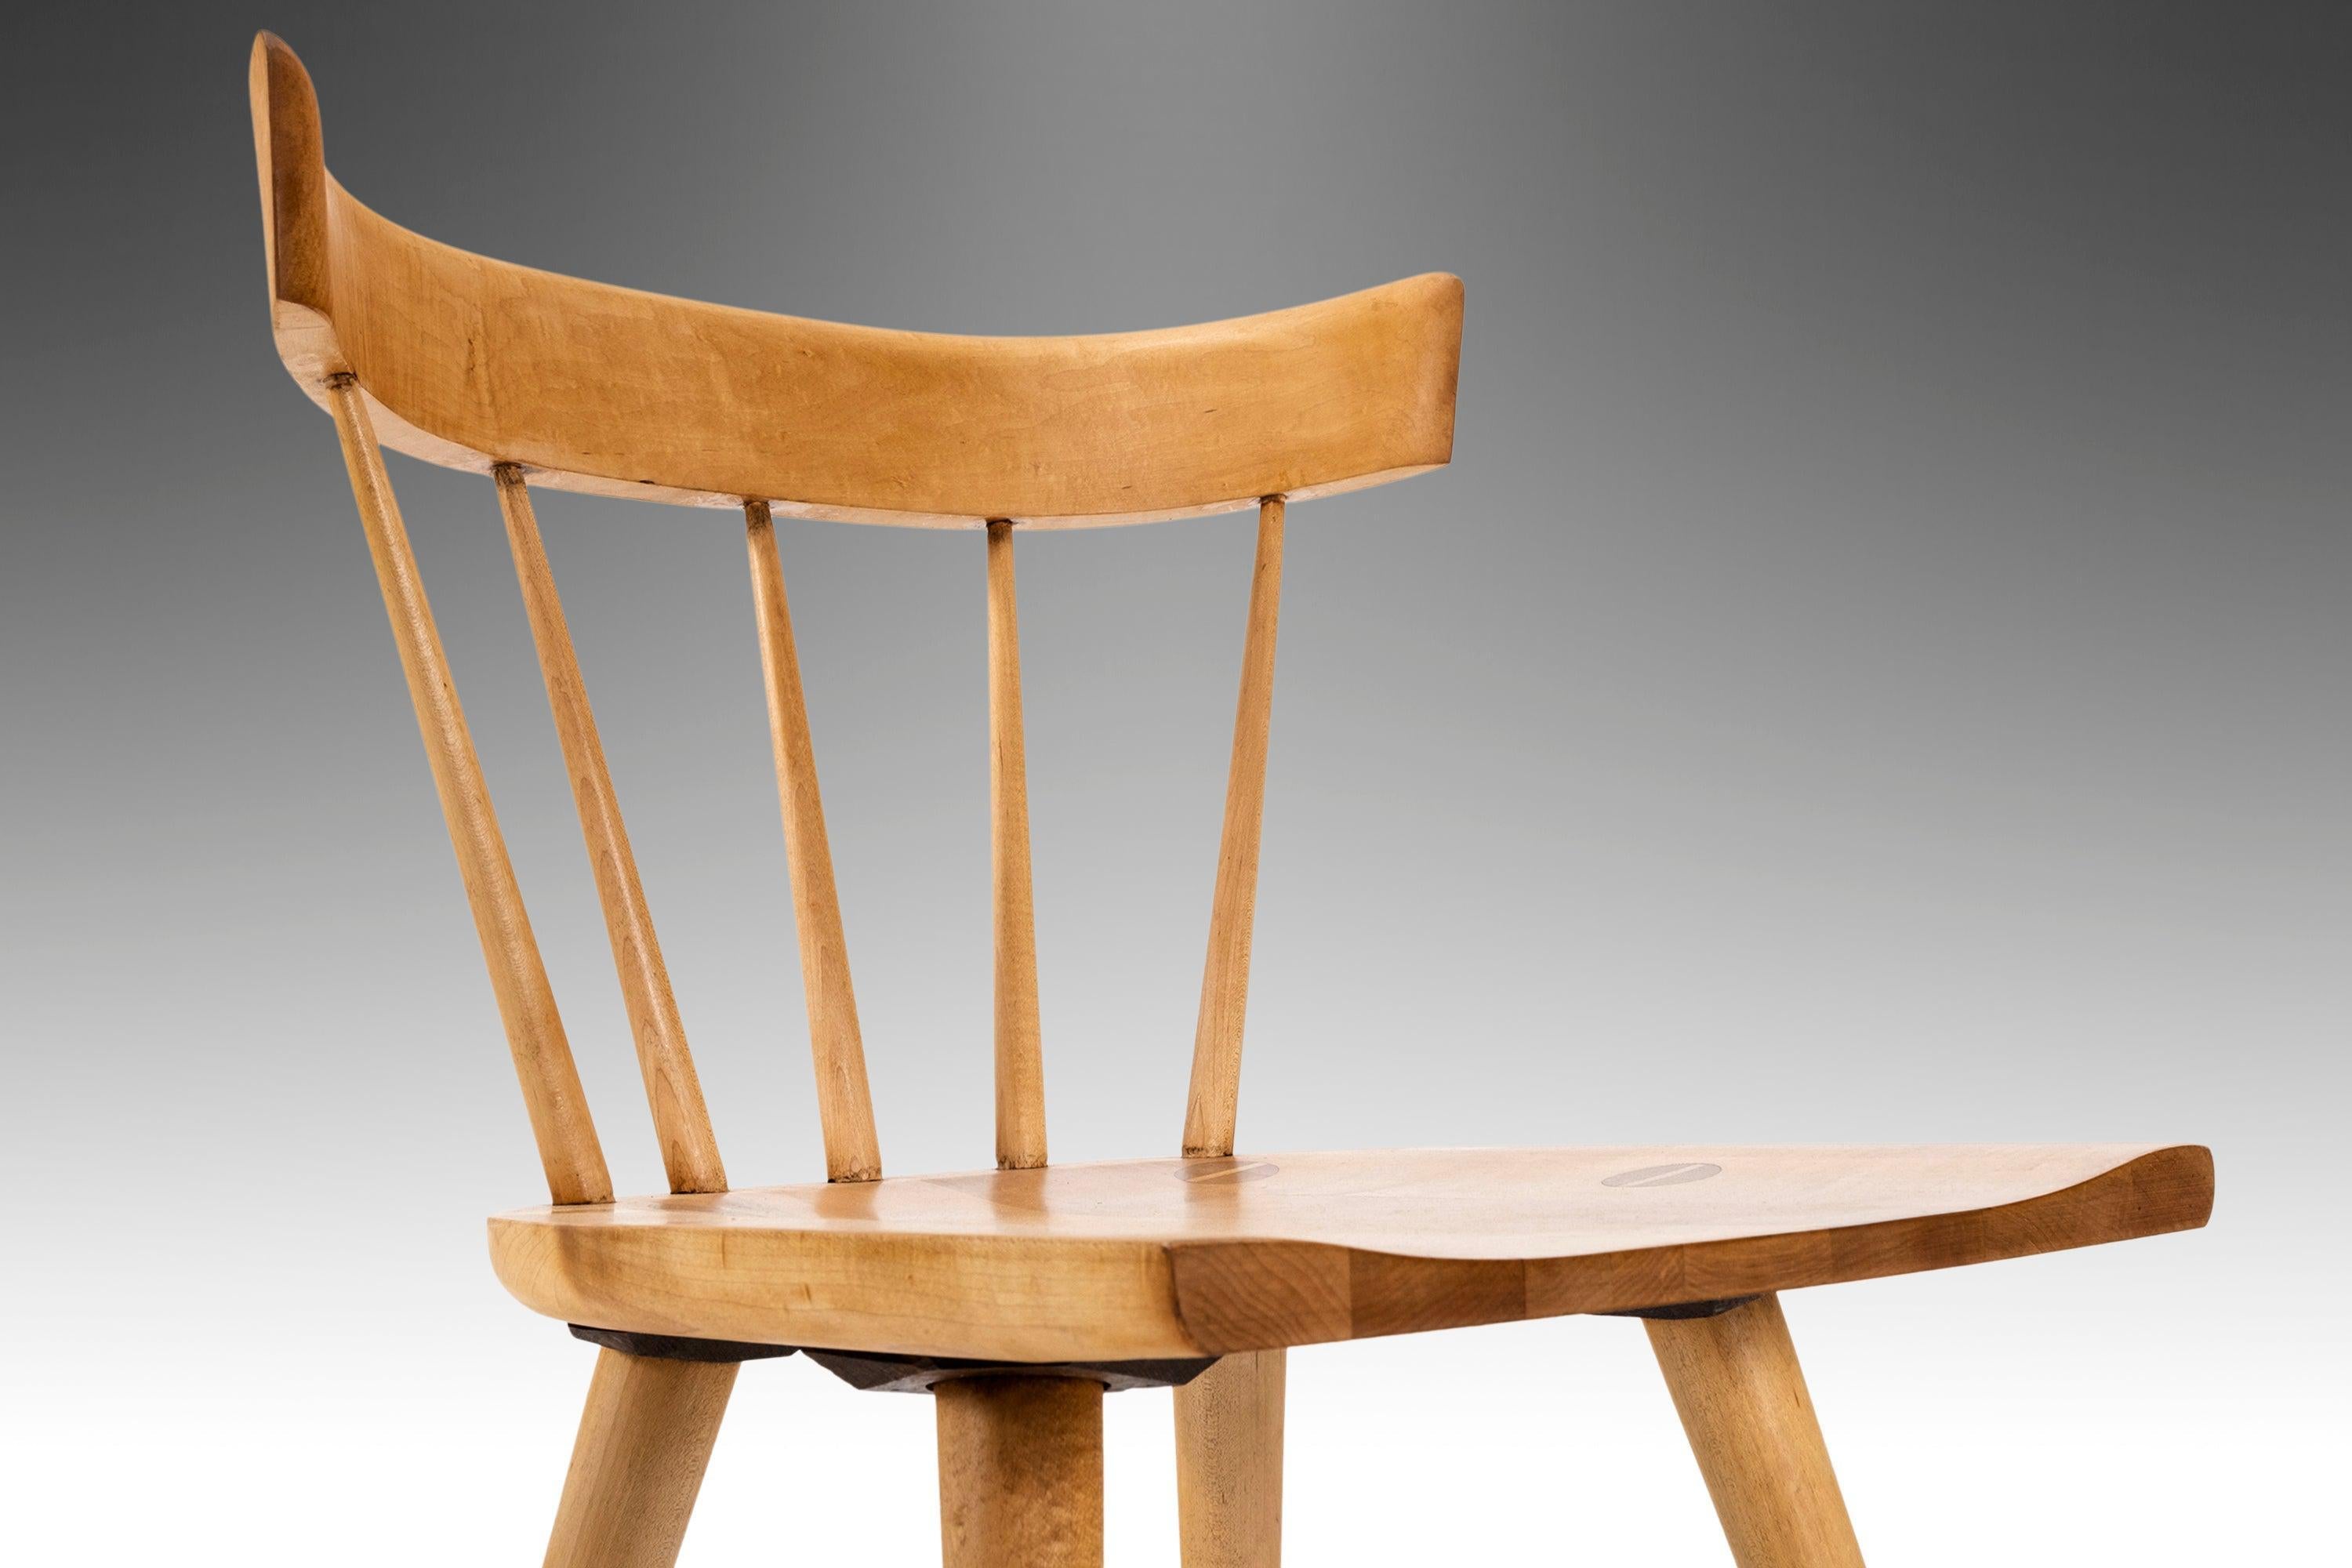 Attention collectors! This iconic set of model #1531 dining chairs designed by the acclaimed Paul McCobb for the Planner Group, has recently undergone an exhaustive restoration and the results are breathtaking. Constructed of solid maple with